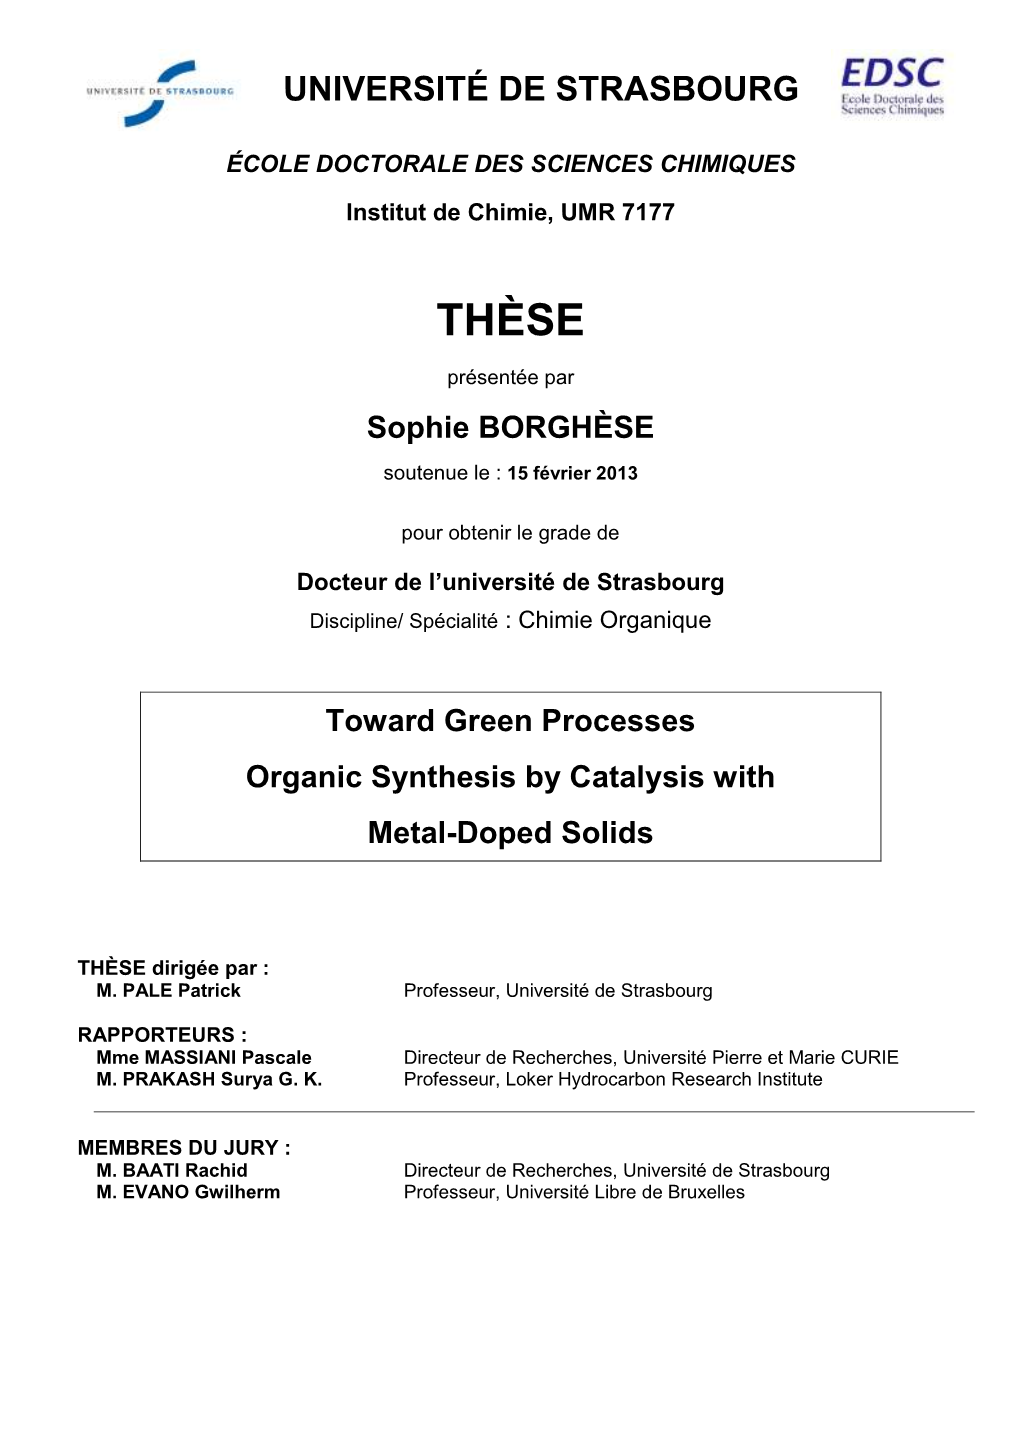 Toward Green Processes Organic Synthesis by Catalysis with Metal-Doped Solids